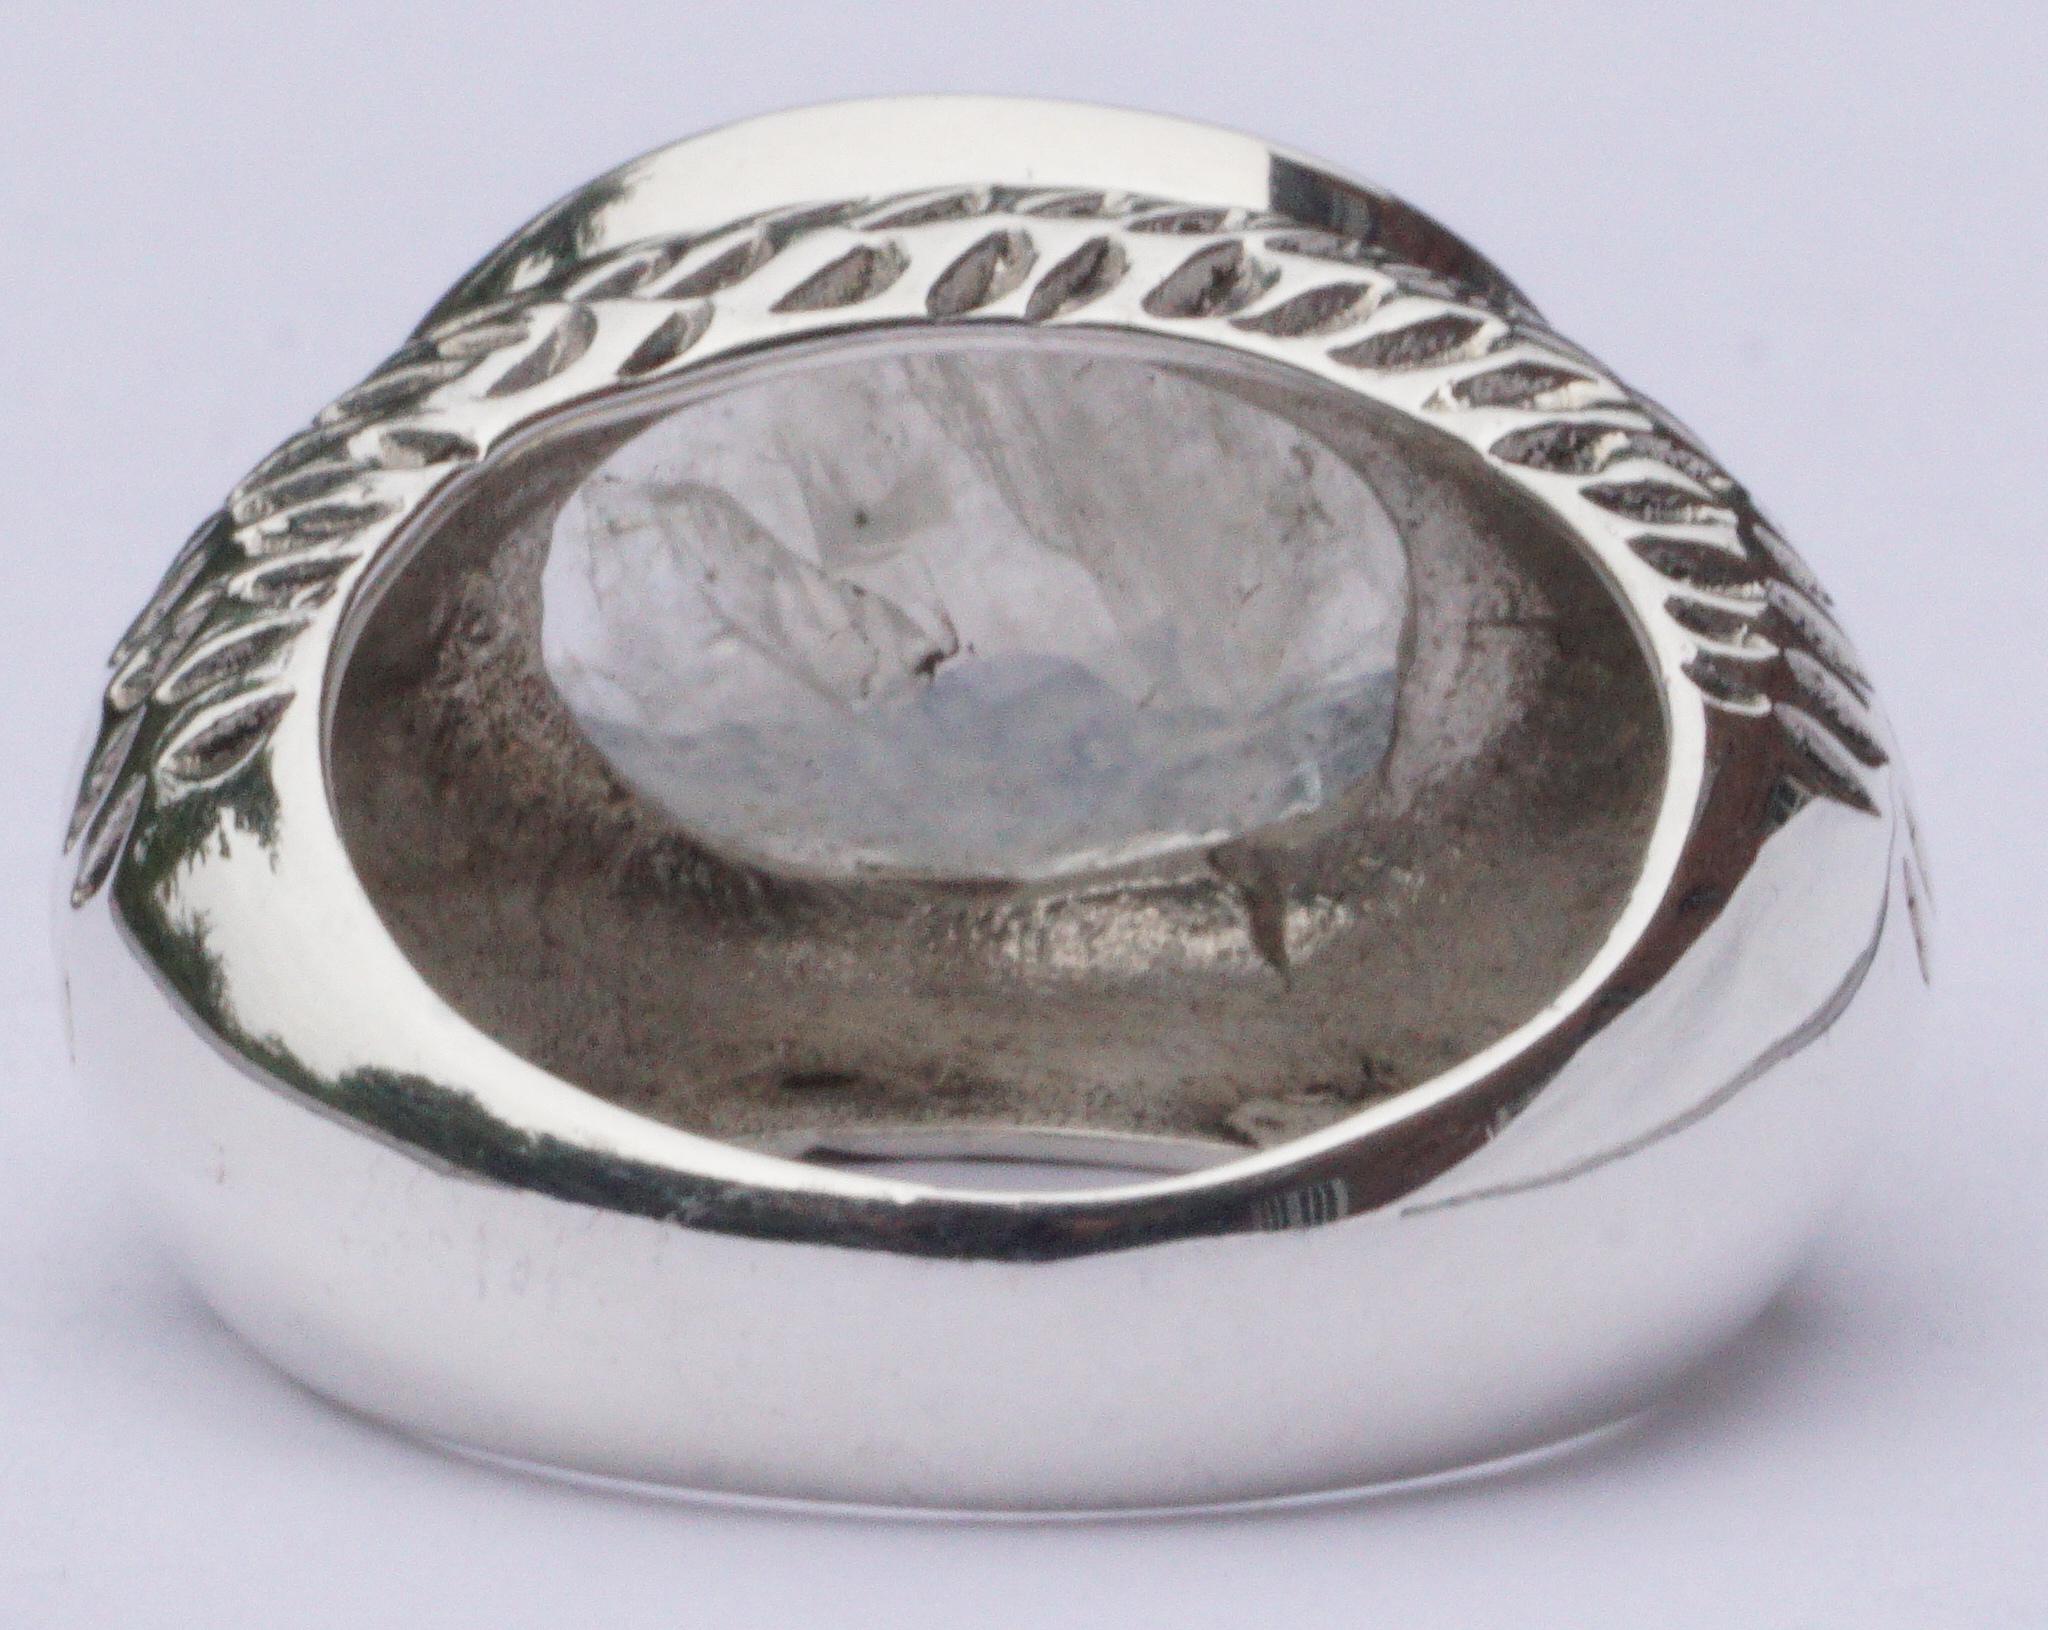 Chunky handmade silver ring with a large moonstone, stamped 925, ring size UK O / US 7. The moonstone is flat on top and faceted around the edge. It is shot through with a lovely bright blue flash of colour inside the stone. The outside of the ring